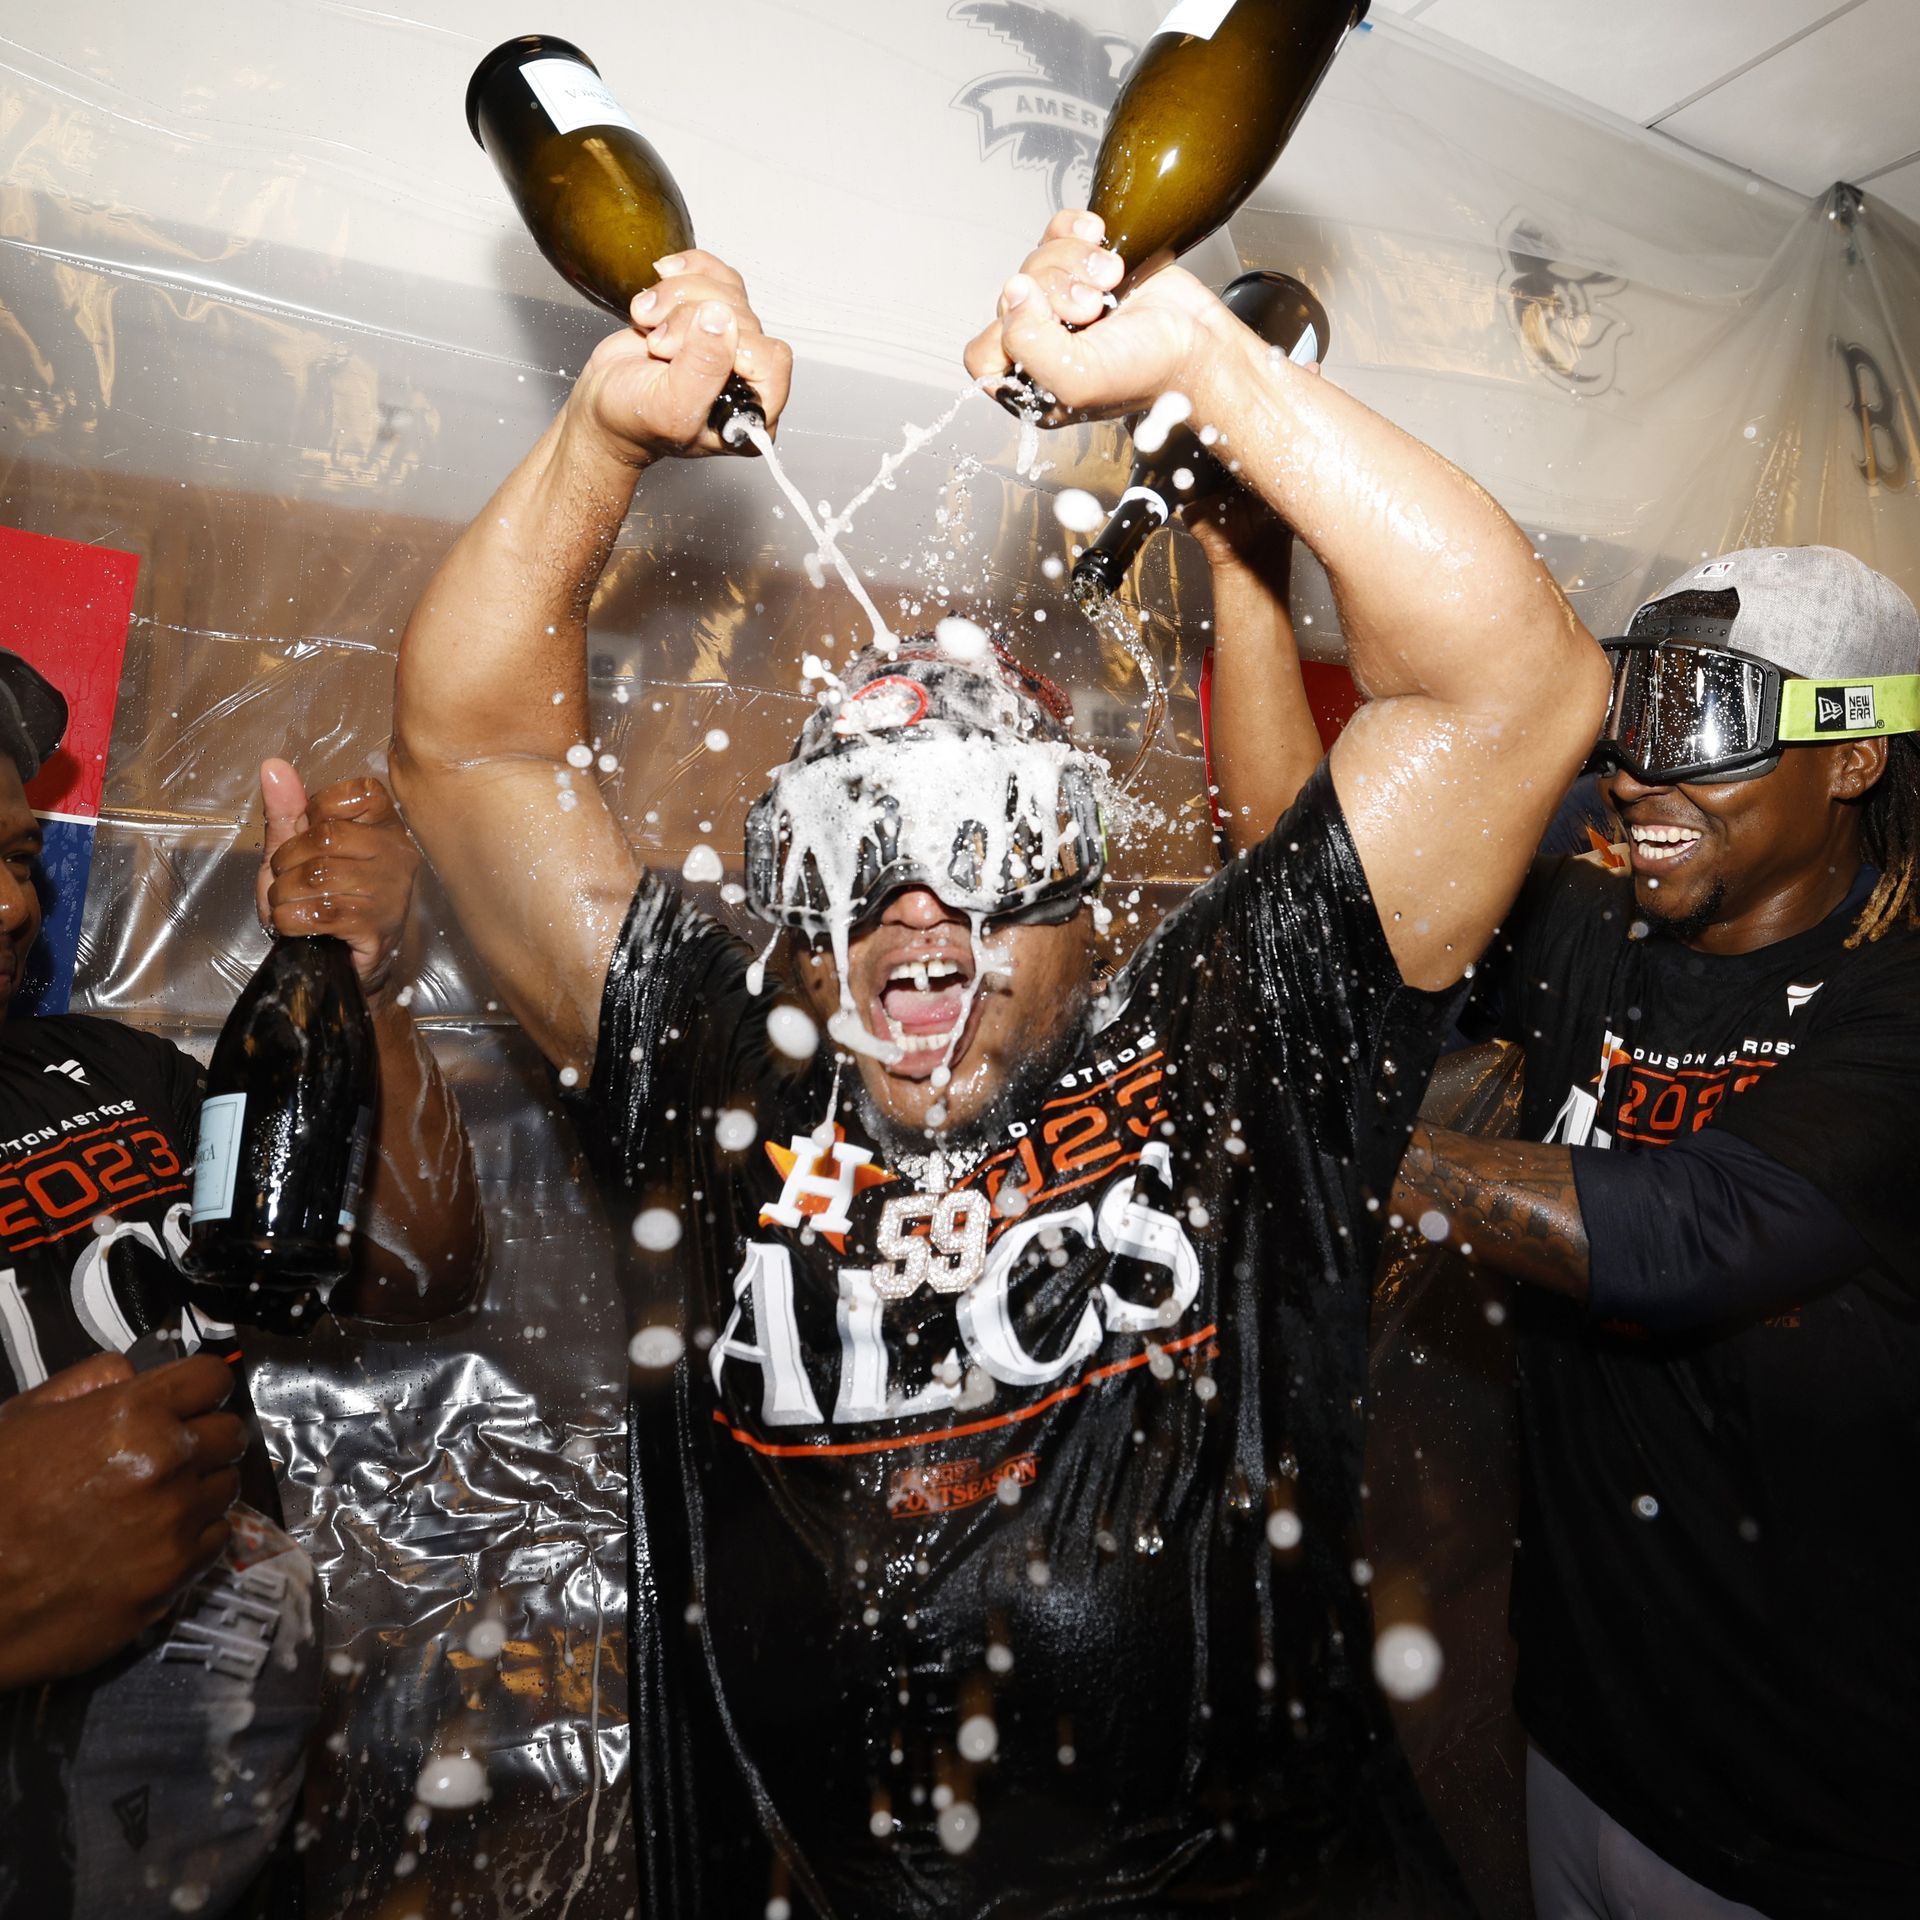 Houston Astros advance to 7th consecutive ALCS with win over Twins